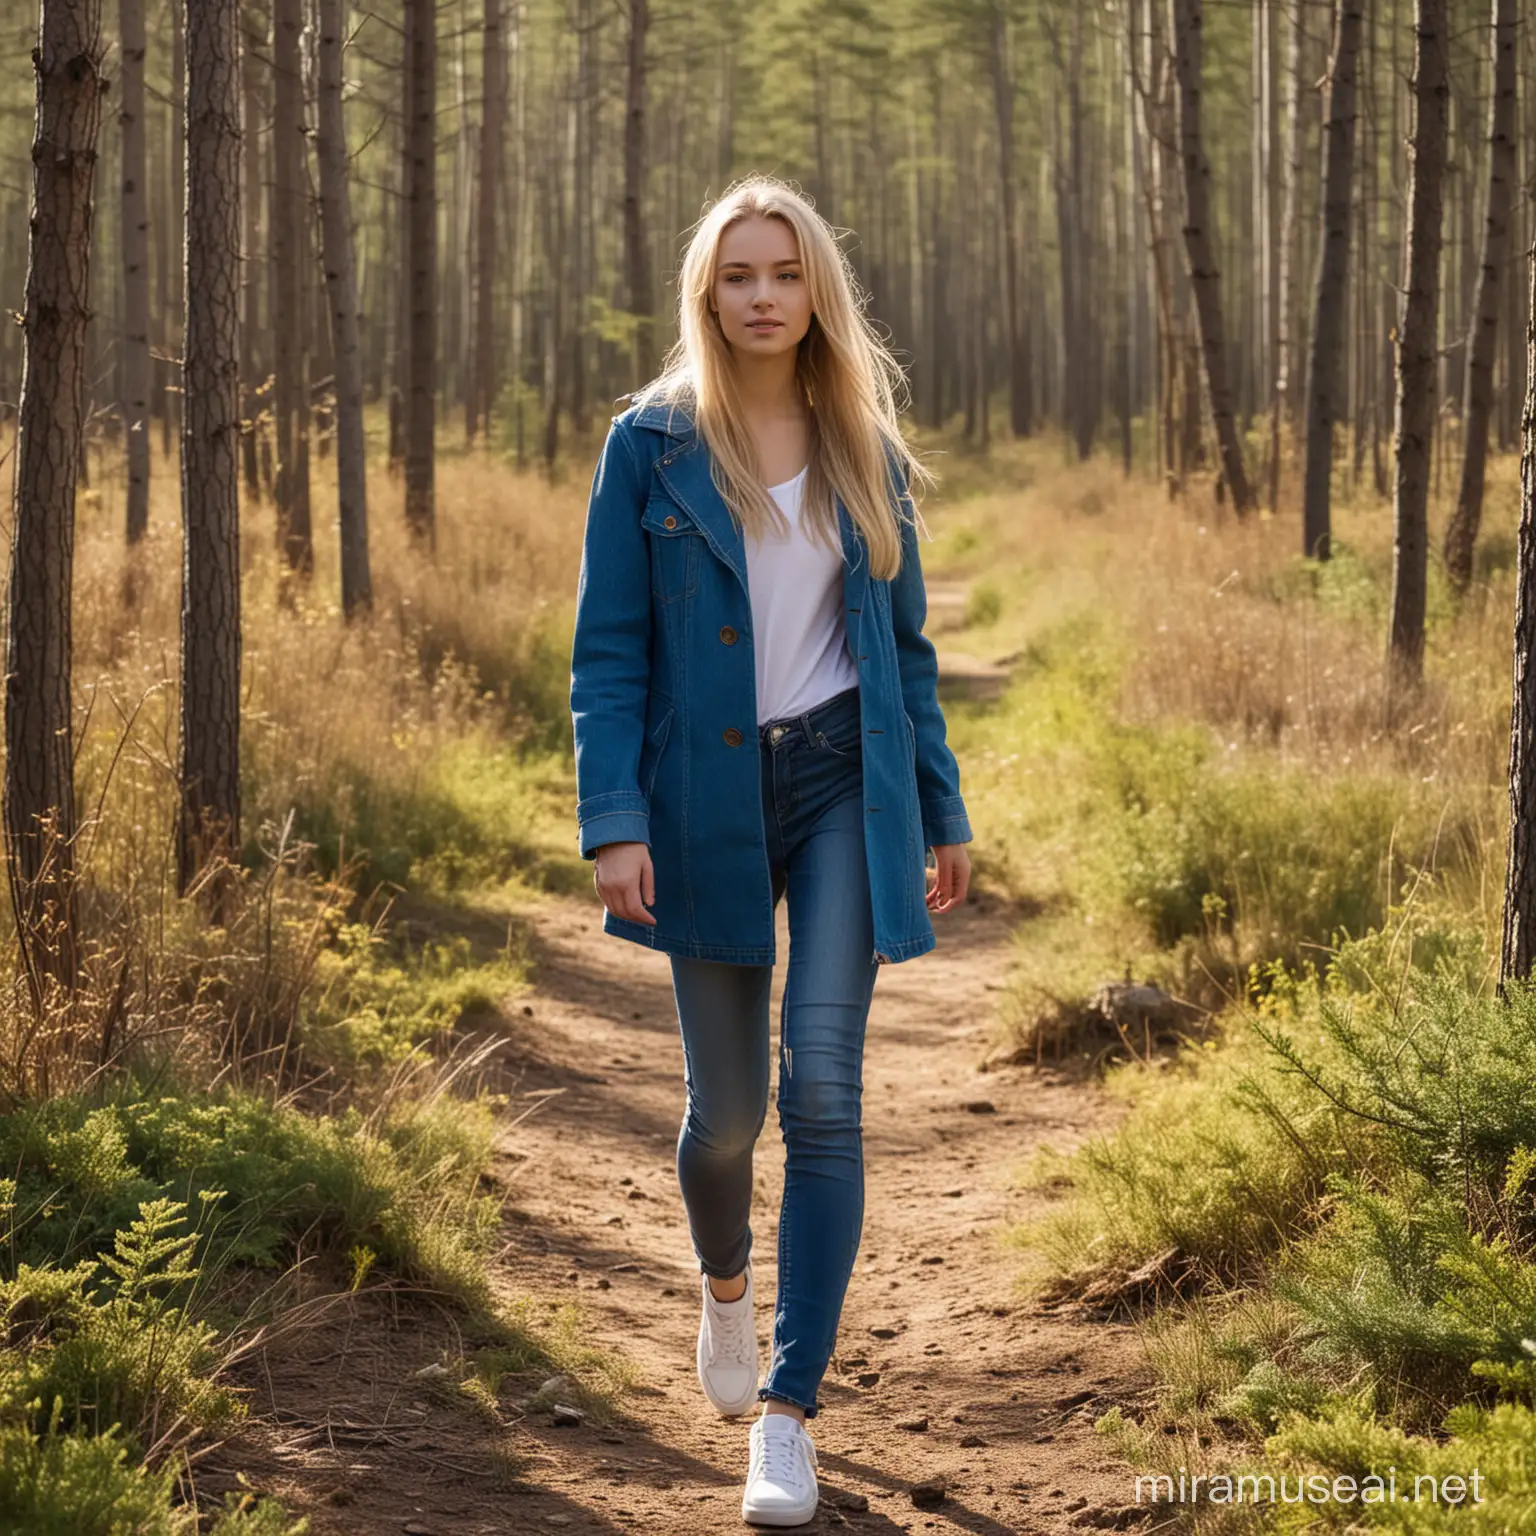 a gorgeous slender 18 year old european girl, long blonde hair, blue jeans, short coat walking through  a boreal forest, sunny weather